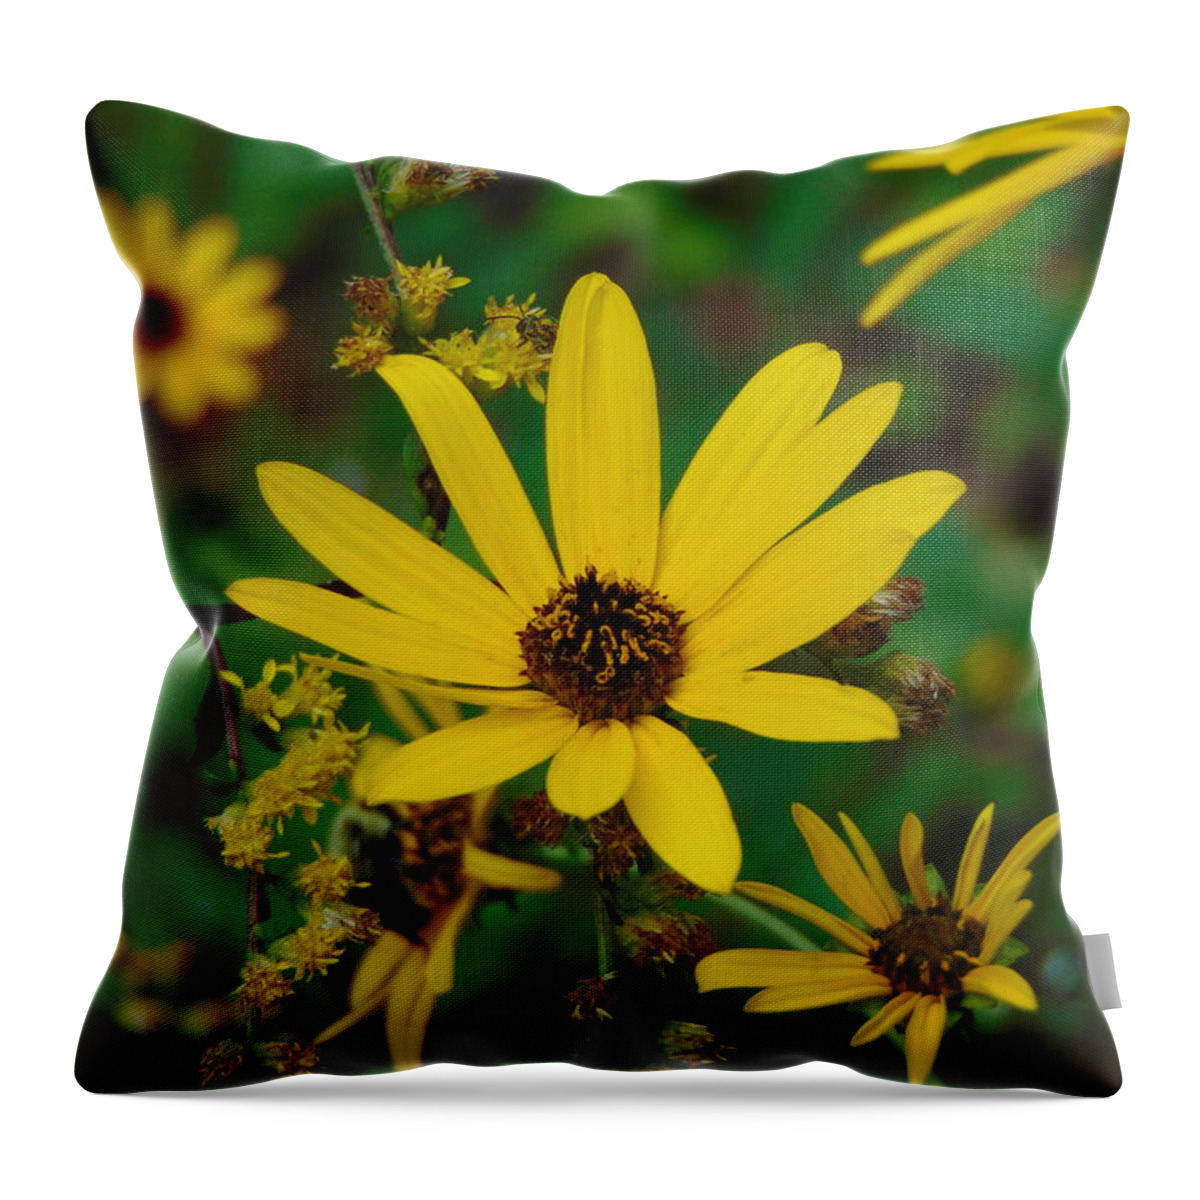 Flower Throw Pillow featuring the photograph Trail Views by Richie Parks